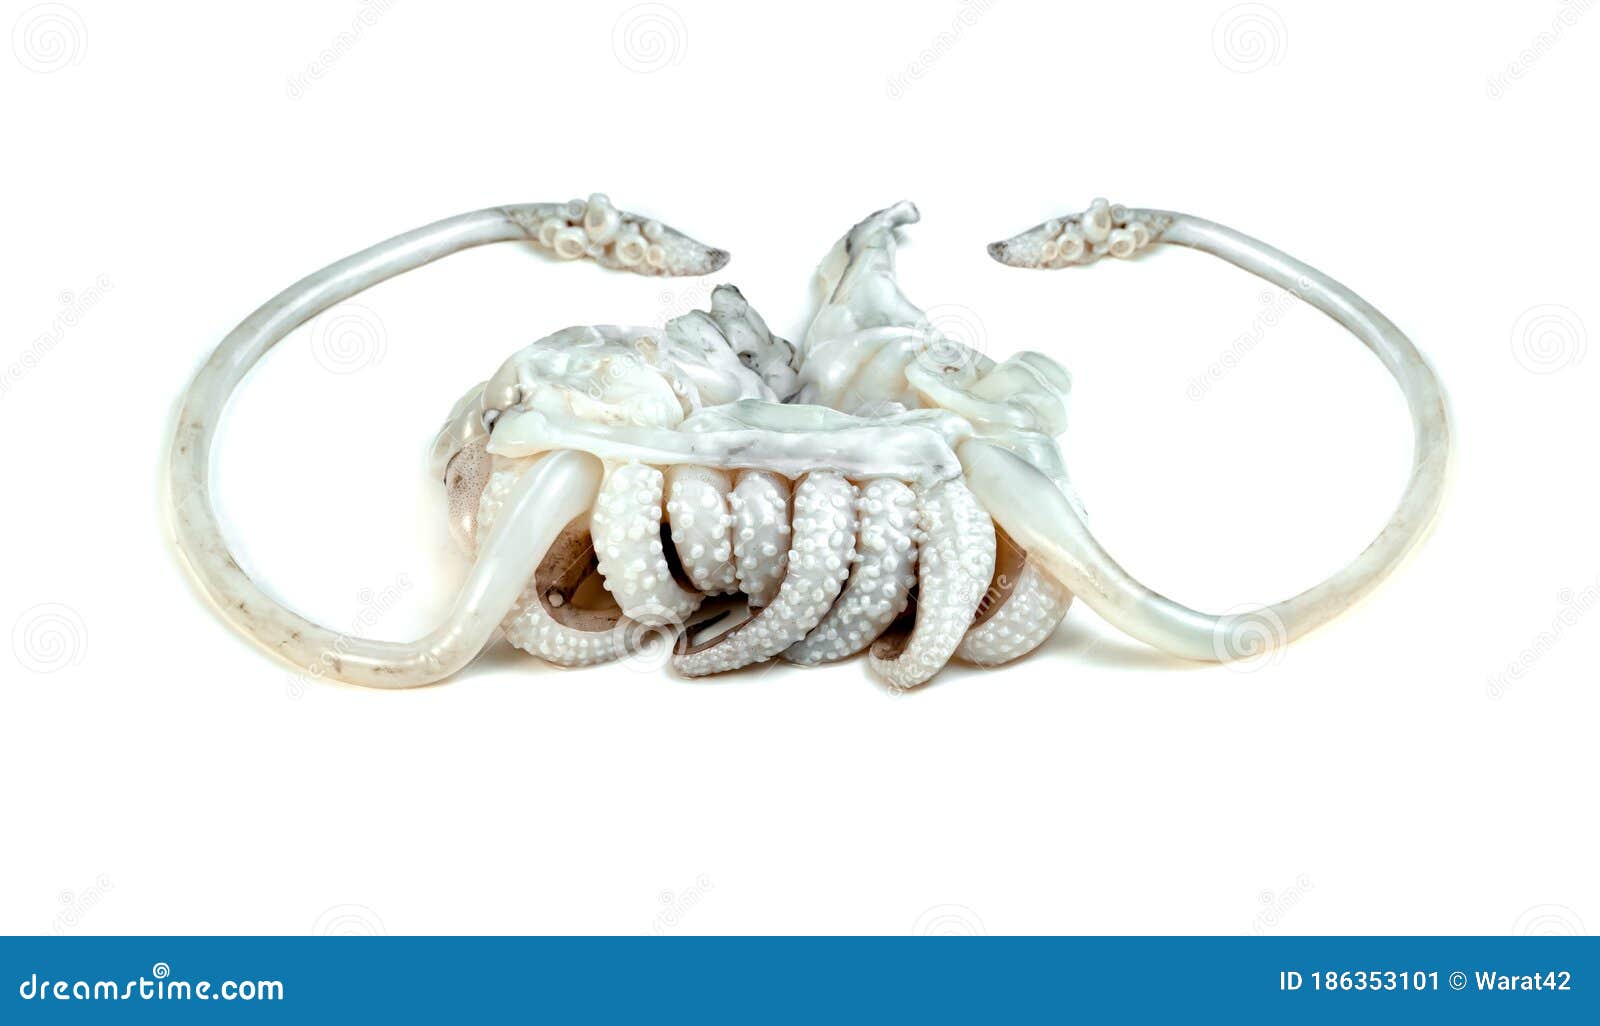 tentacles of squid  on white background